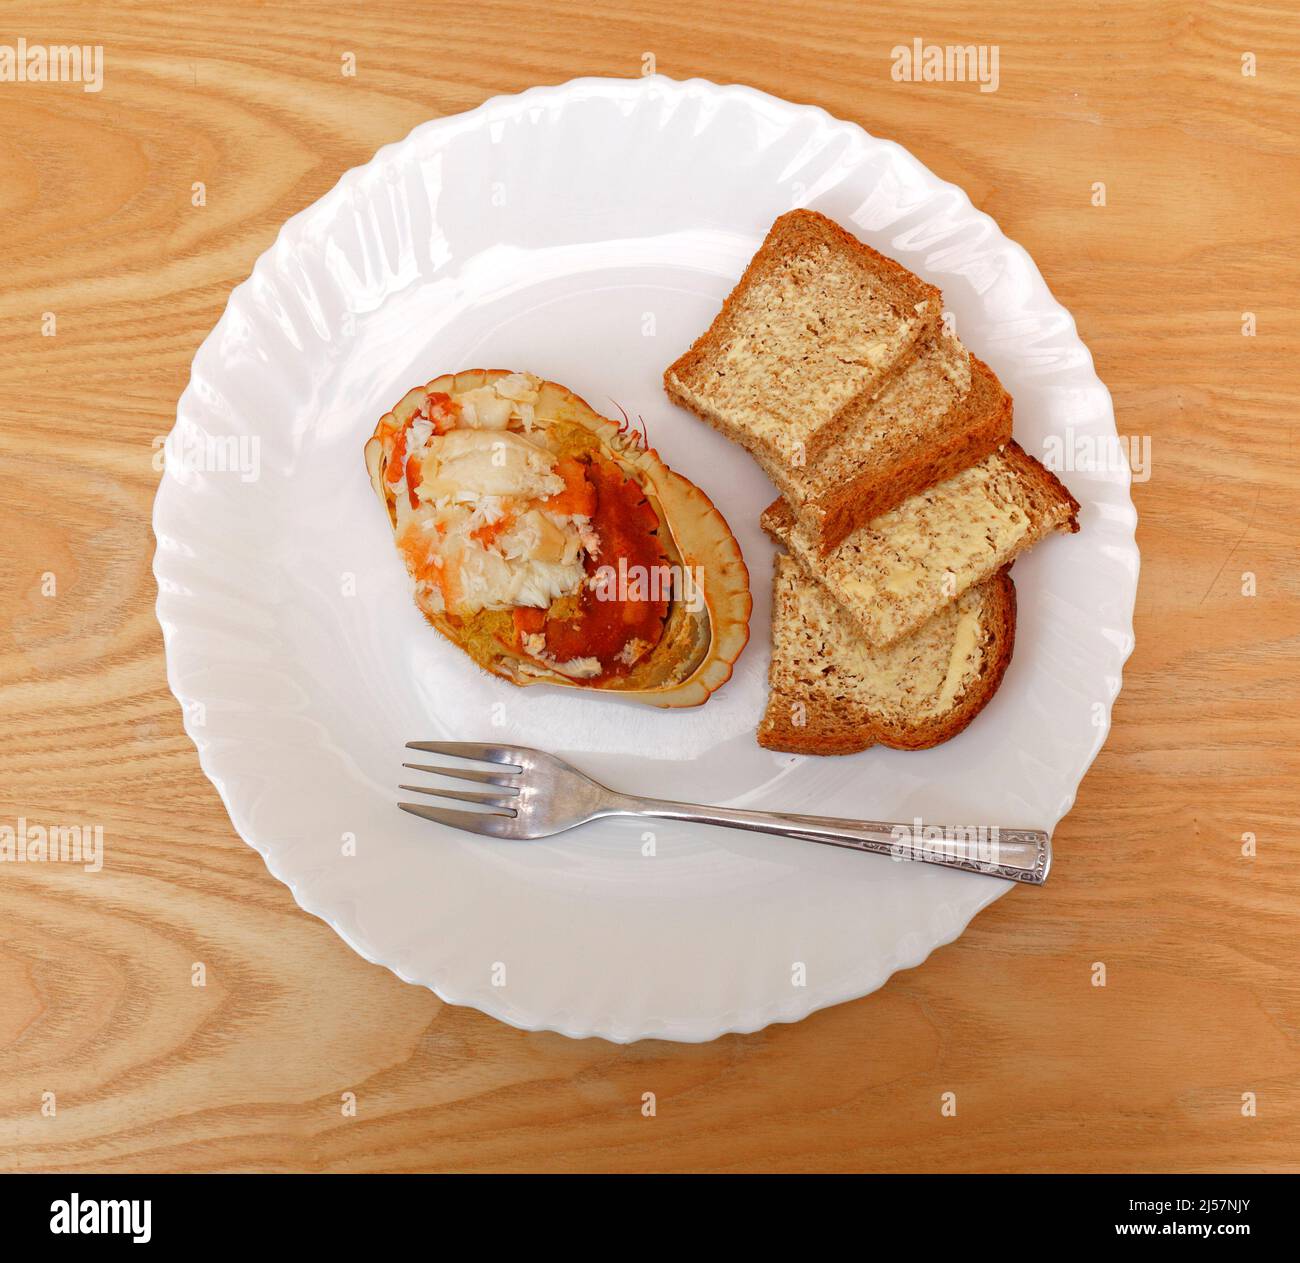 A plate with a dressed crab accompanied by slices of wholemeal brown bread for a light lunch. Stock Photo